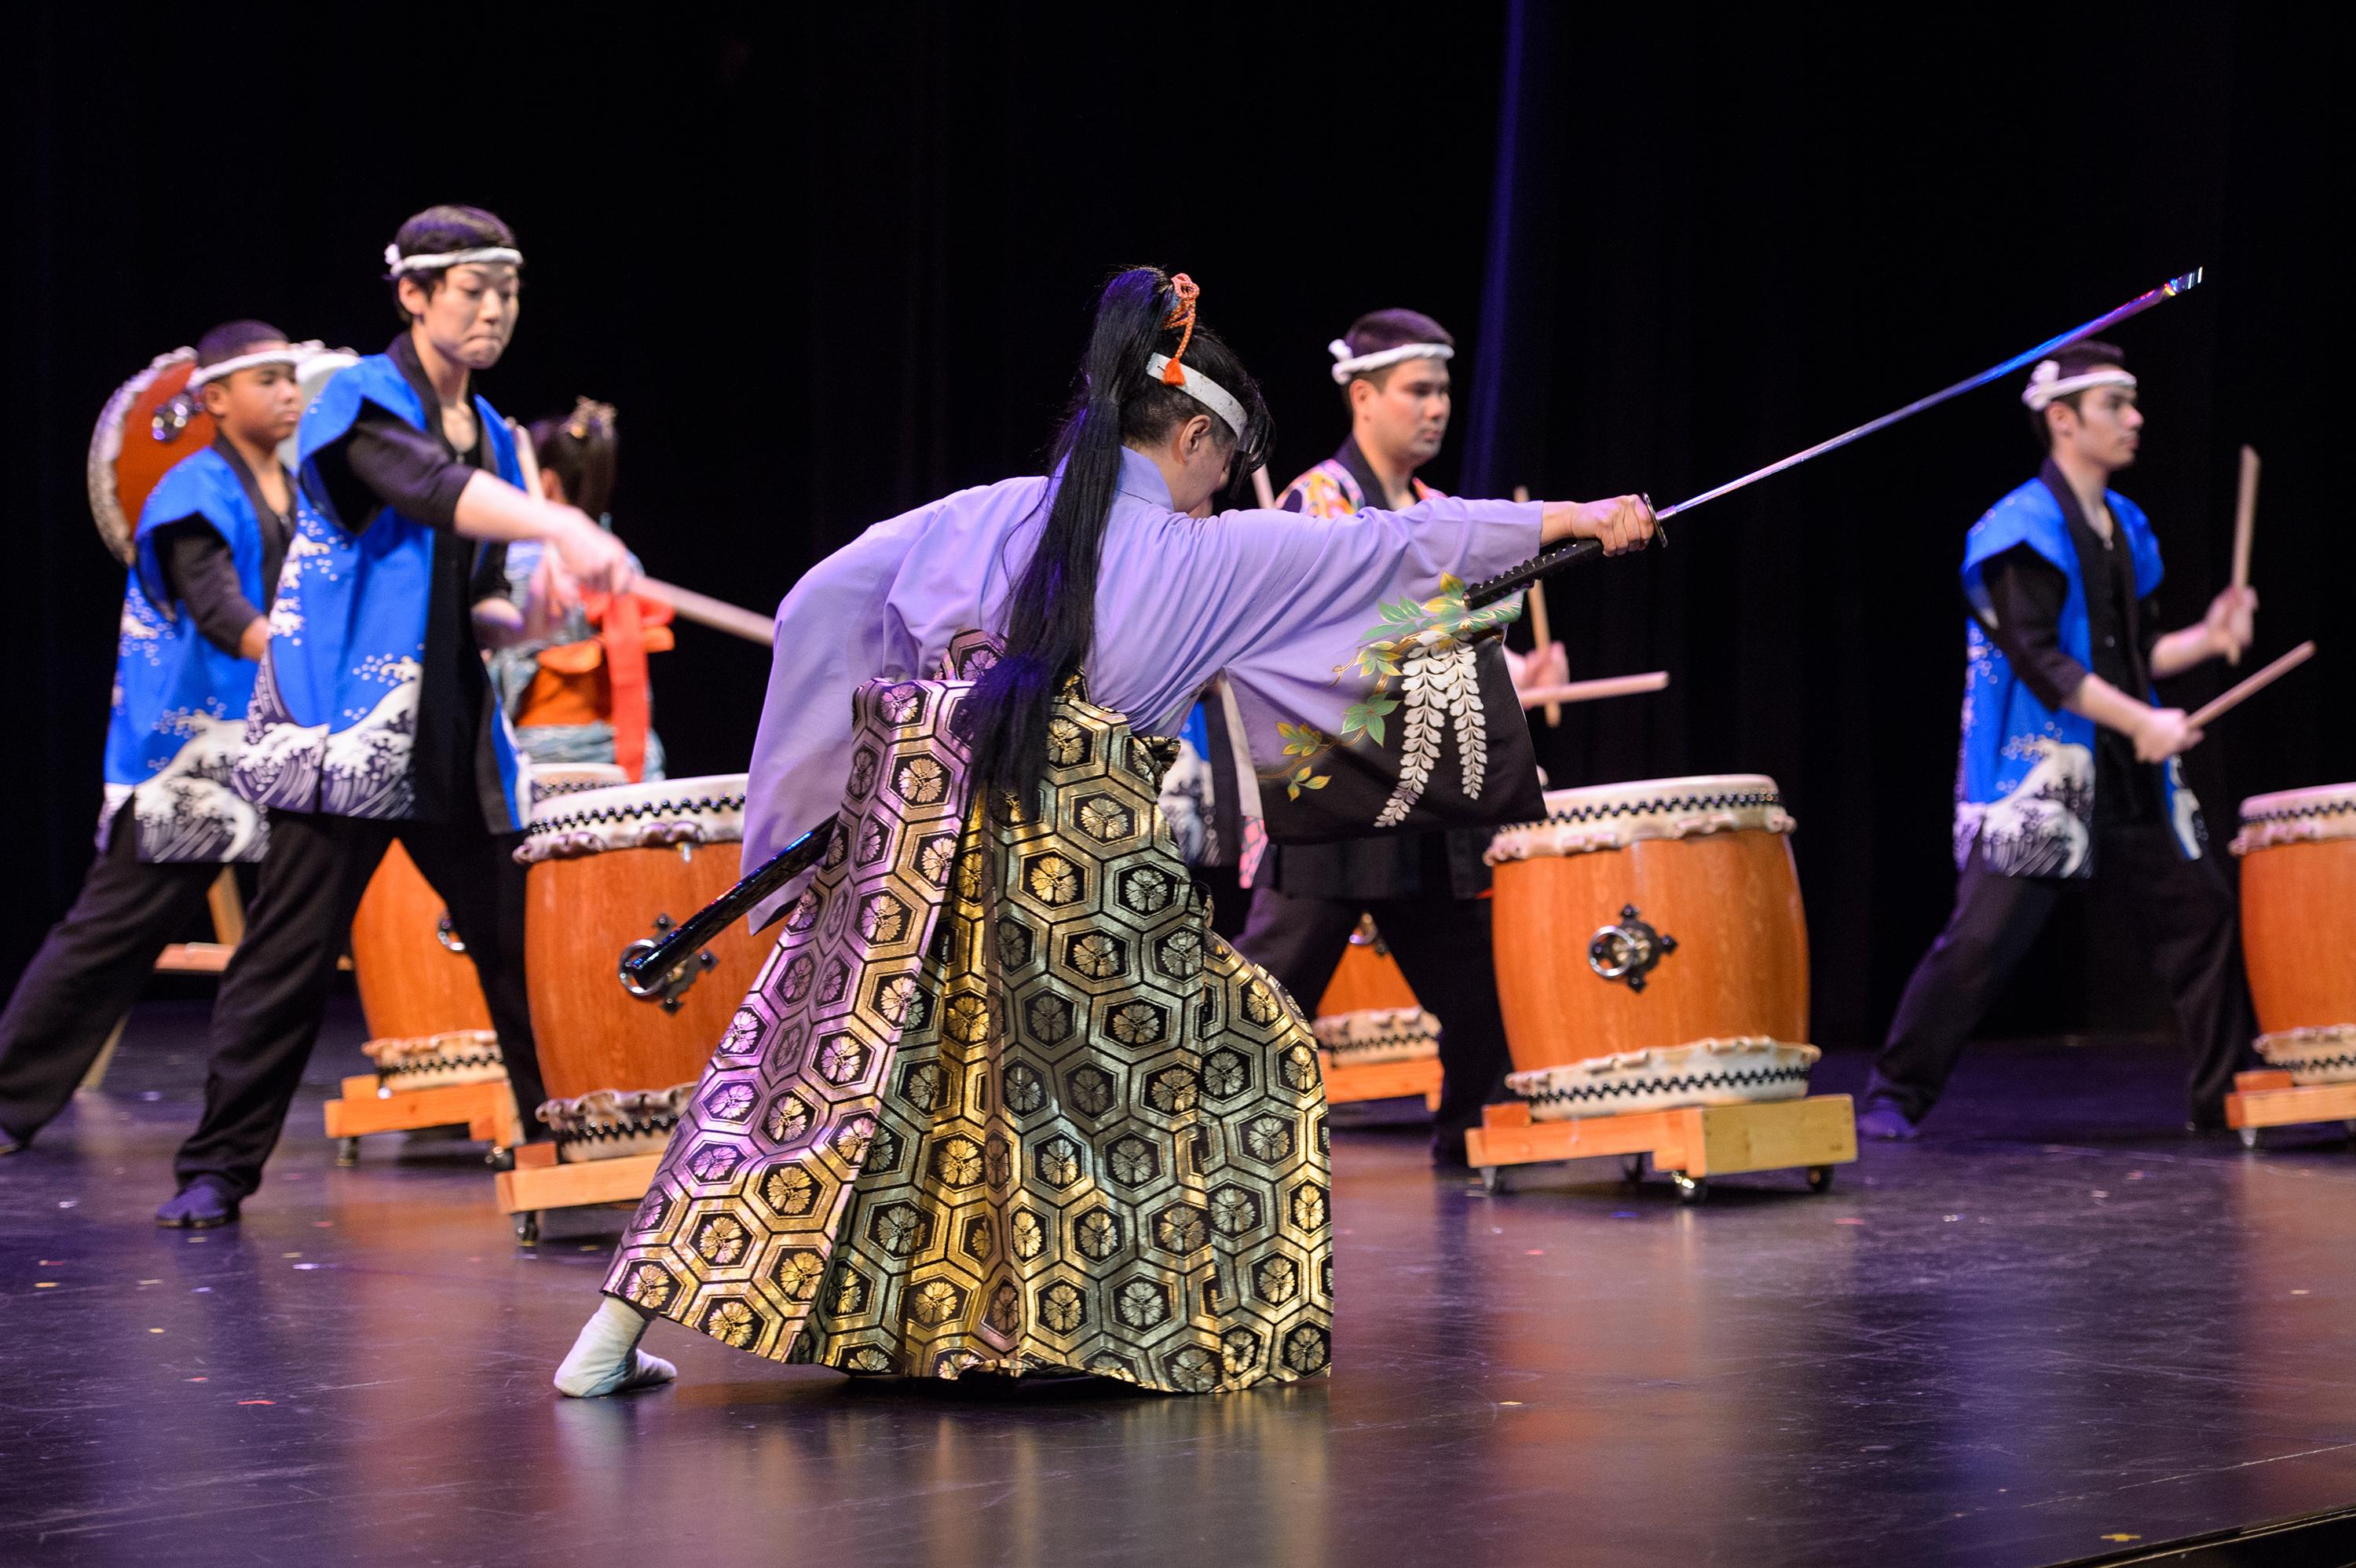 On stage, a woman in traditional Japanese clothing lunges with a long-handled sword while young male drummers play *taiko* drums behind her.